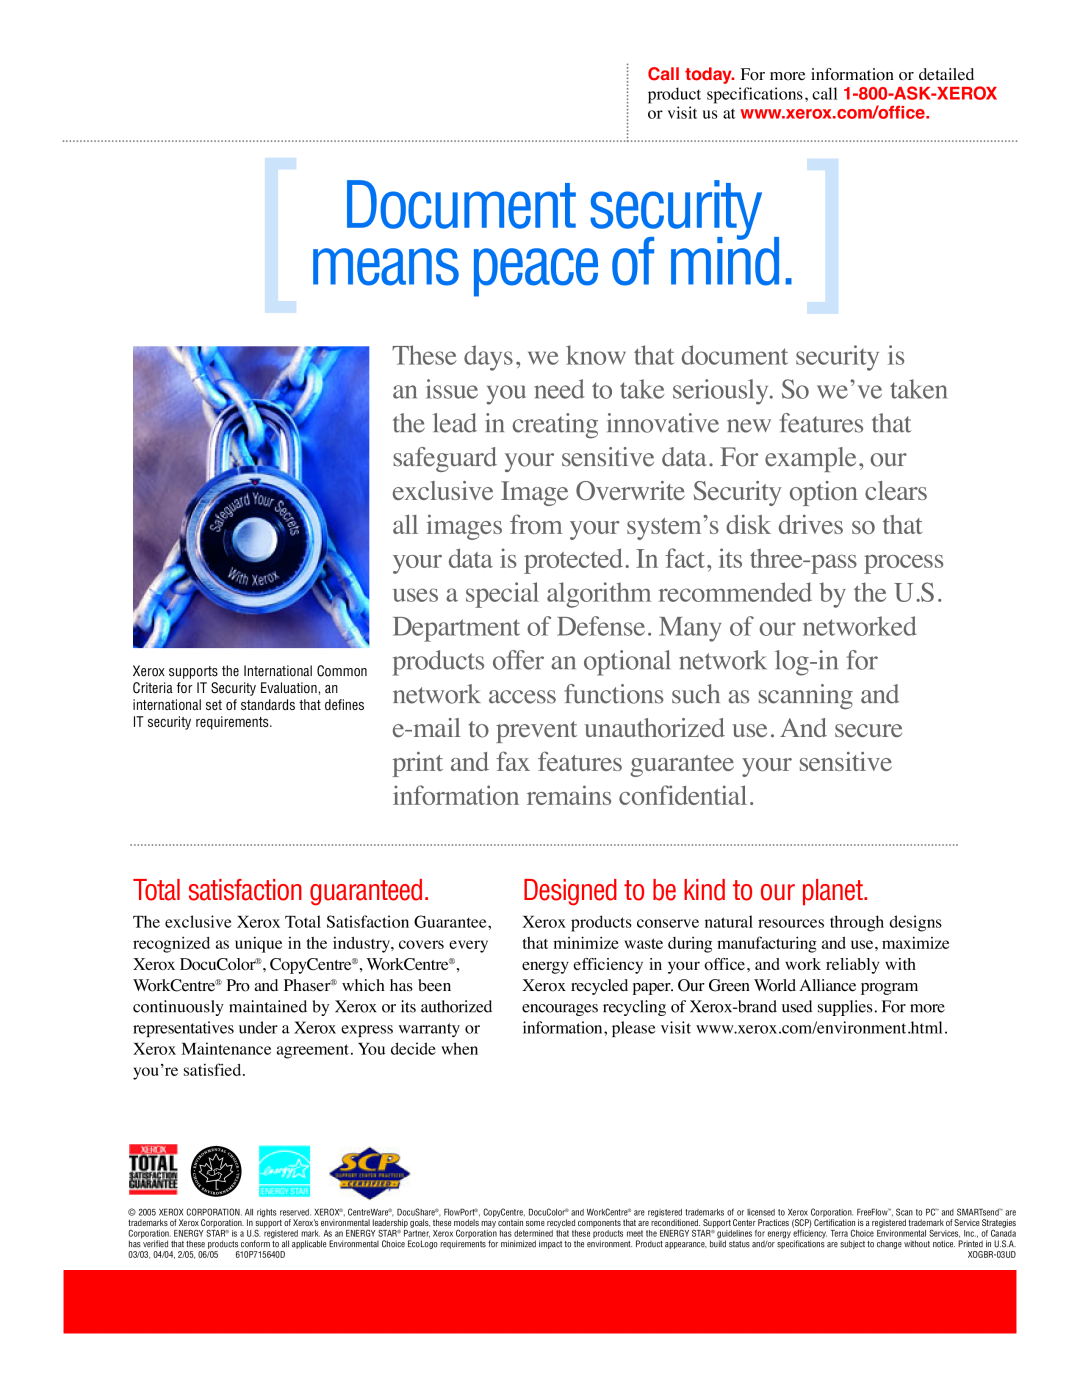 Xerox C3545, 275 Document security means peace of mind, Total satisfaction guaranteed, Designed to be kind to our planet 